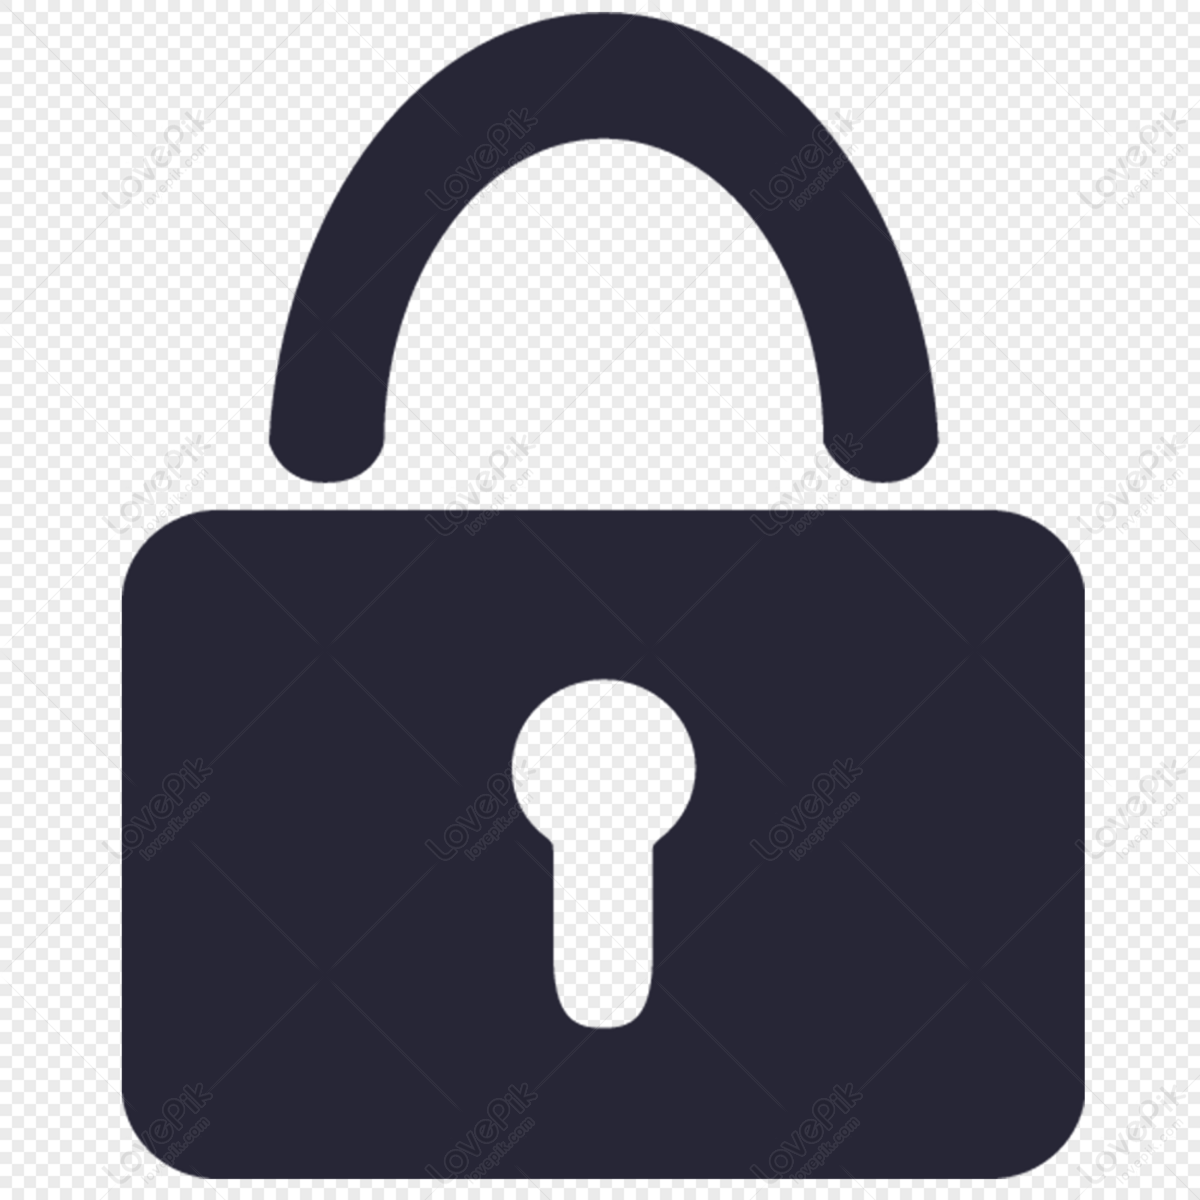 Lock PNG Transparent And Clipart Image For Free Download - Lovepik |  400195166